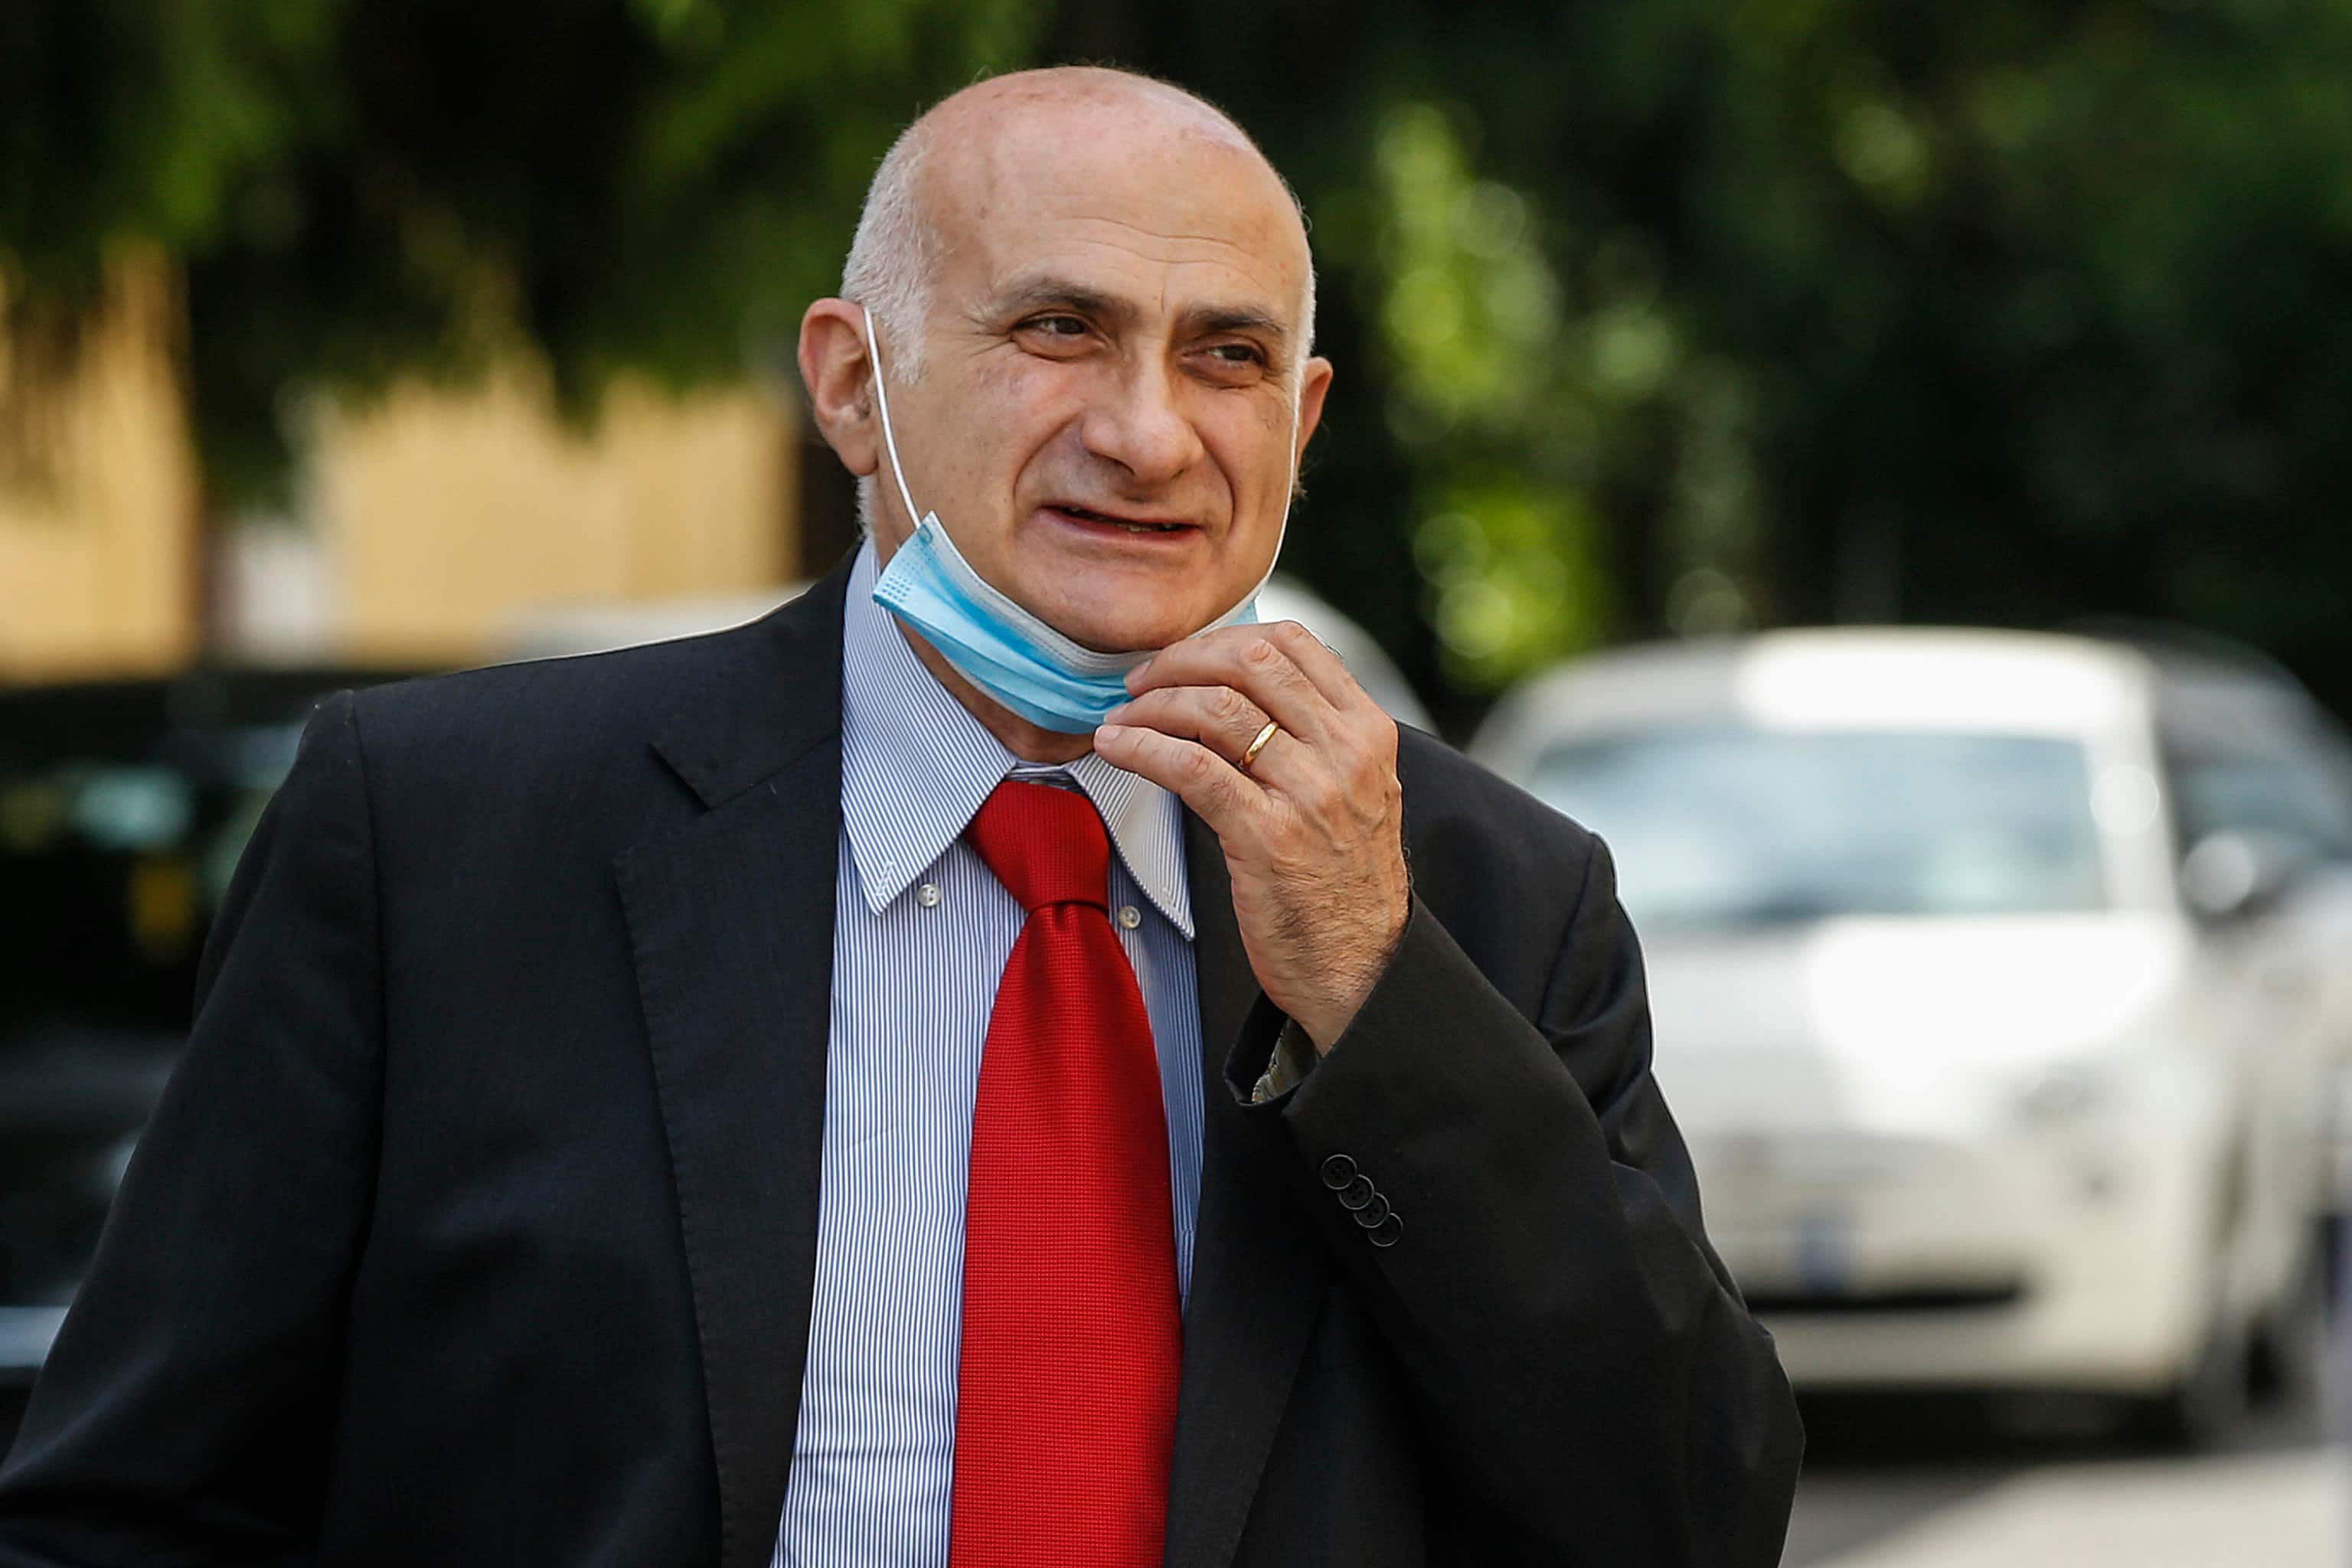 Giuseppe Ippolito, Scientific Director of the Lazzaro Spallanzani Hospital, on his arrival for the press conference to present the first data on serological tests carried out in the Lazio Region, at the Lazzaro Spallanzani Hospital, Rome, Italy, 20 May 2020. ANSA / FABIO FRUSTACI